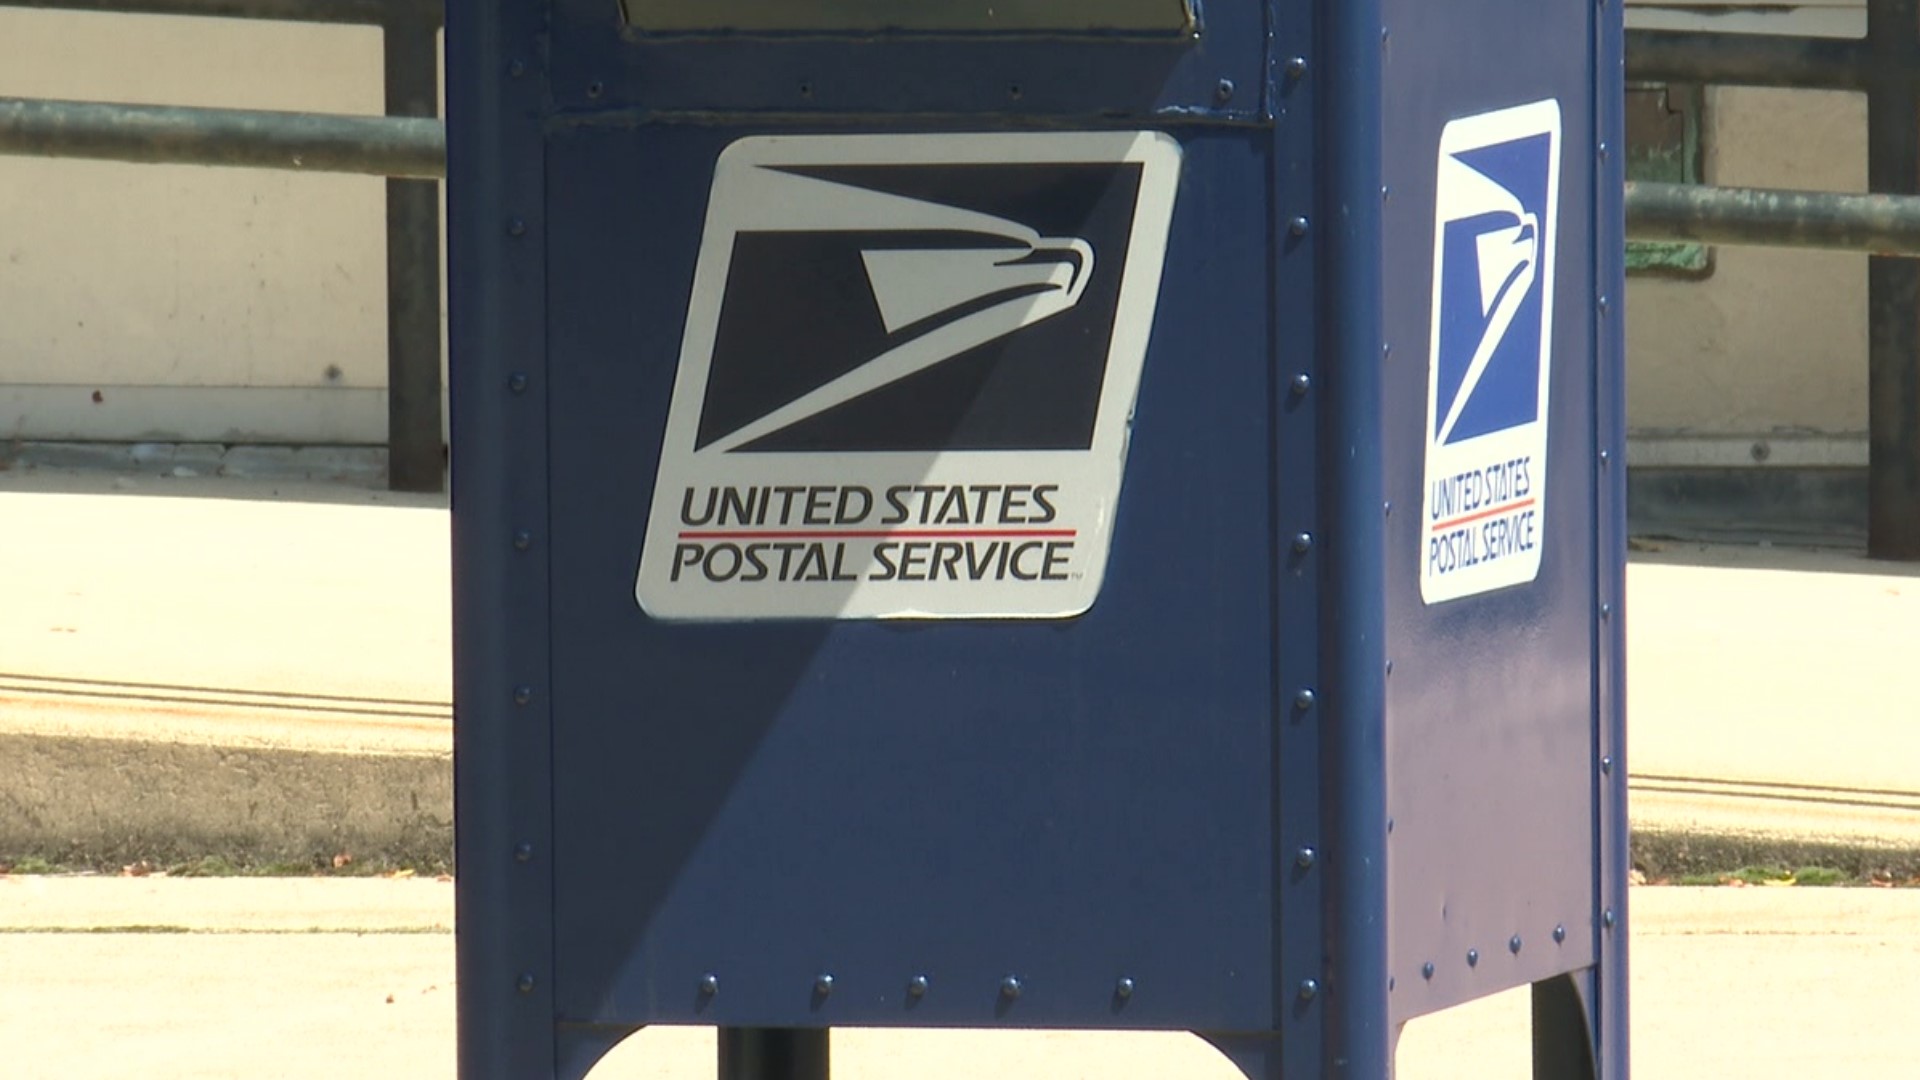 One business owner says sending products through the mail is not as stress-free as it used to be.